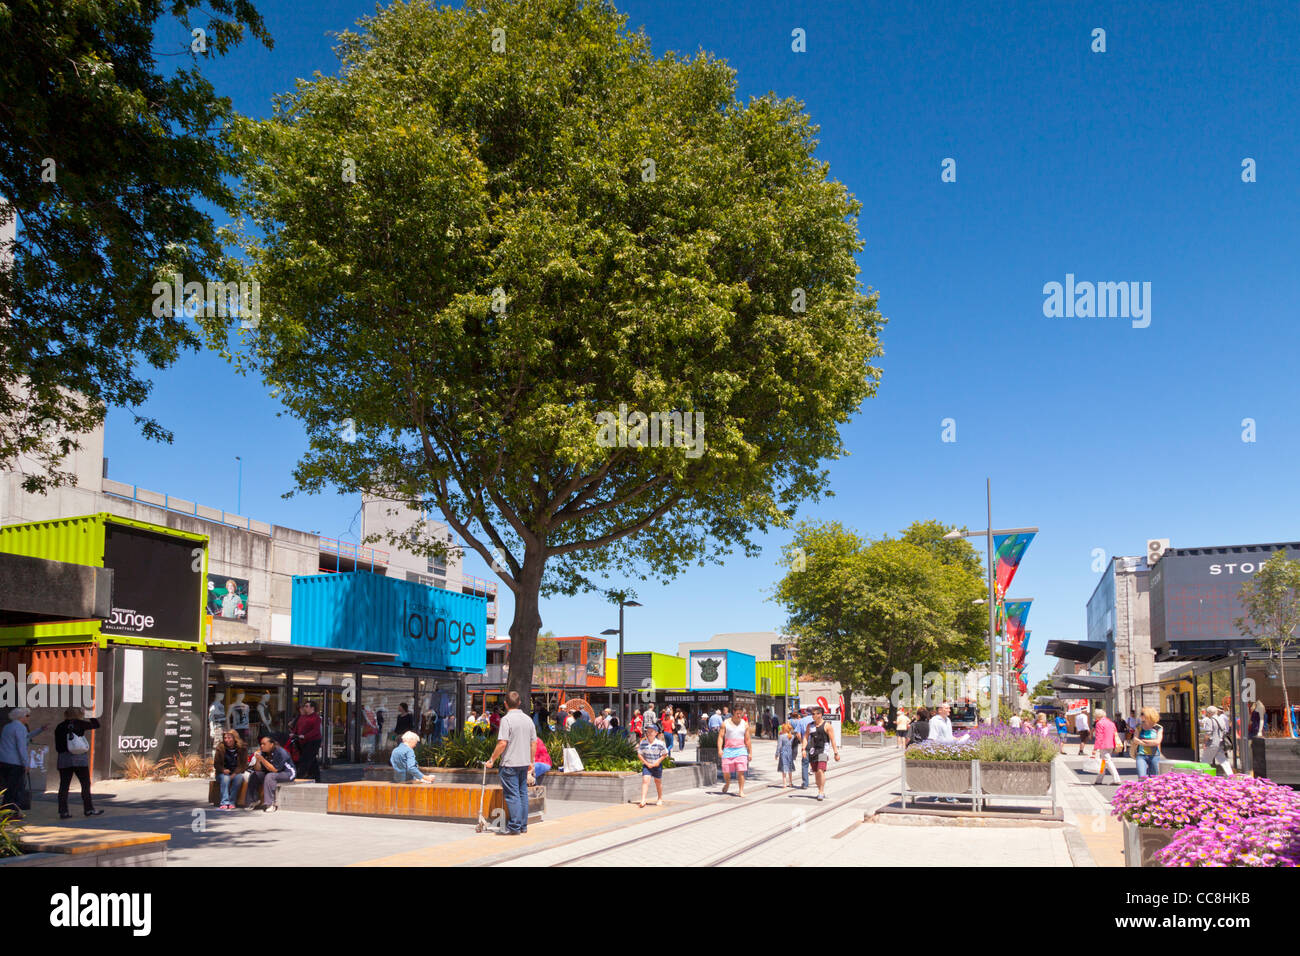 Shopping mall made from shipping containers in central Christchurch New Zealand. Stock Photo